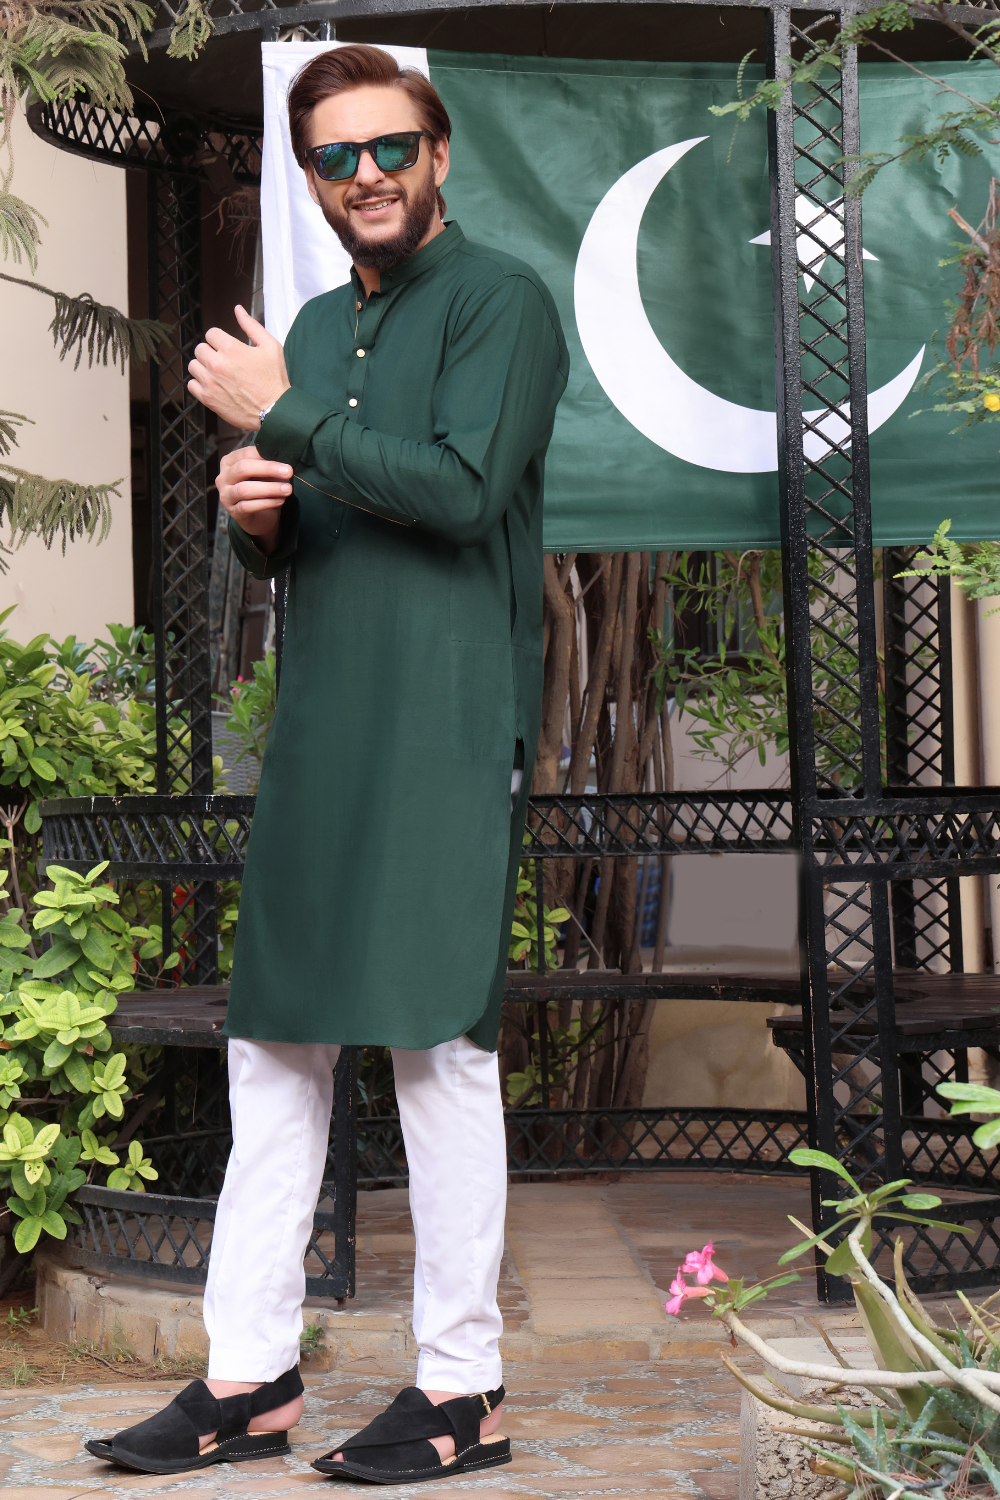 Men's Shalwar Kameez in the UK: A Blend of Tradition and Modern Fashion